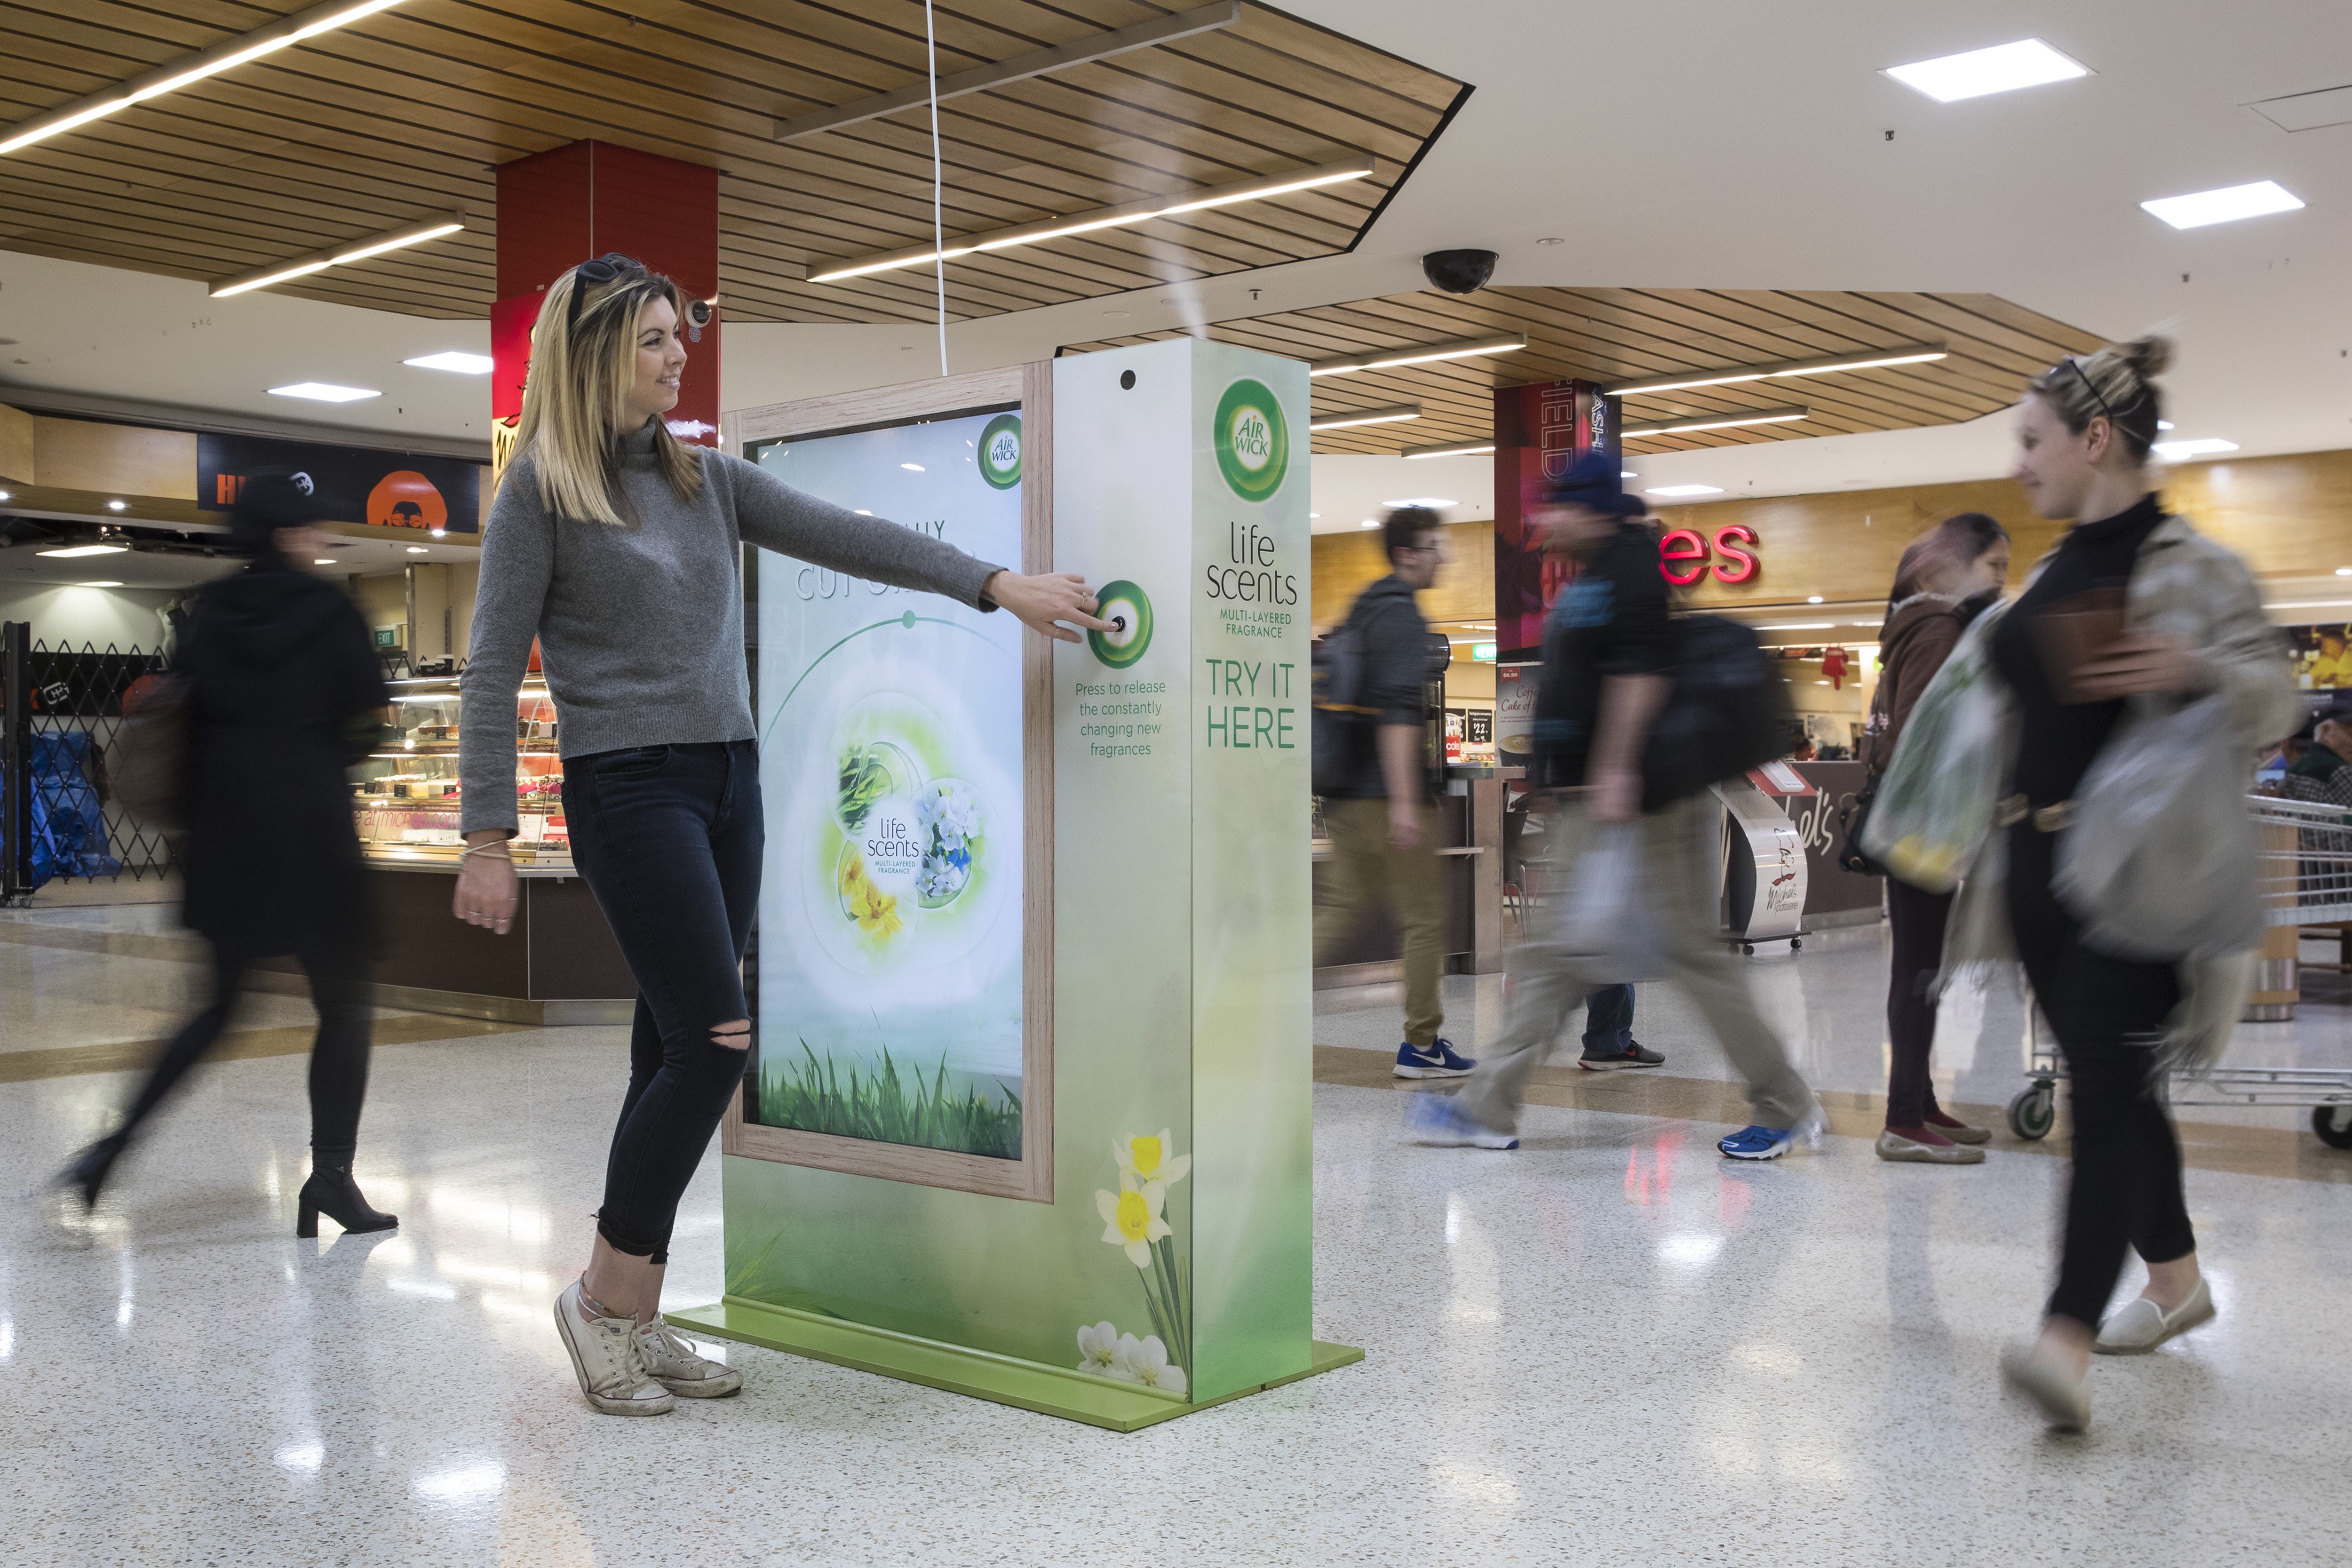 Airwick life scents out of home scented panel experiential marketing